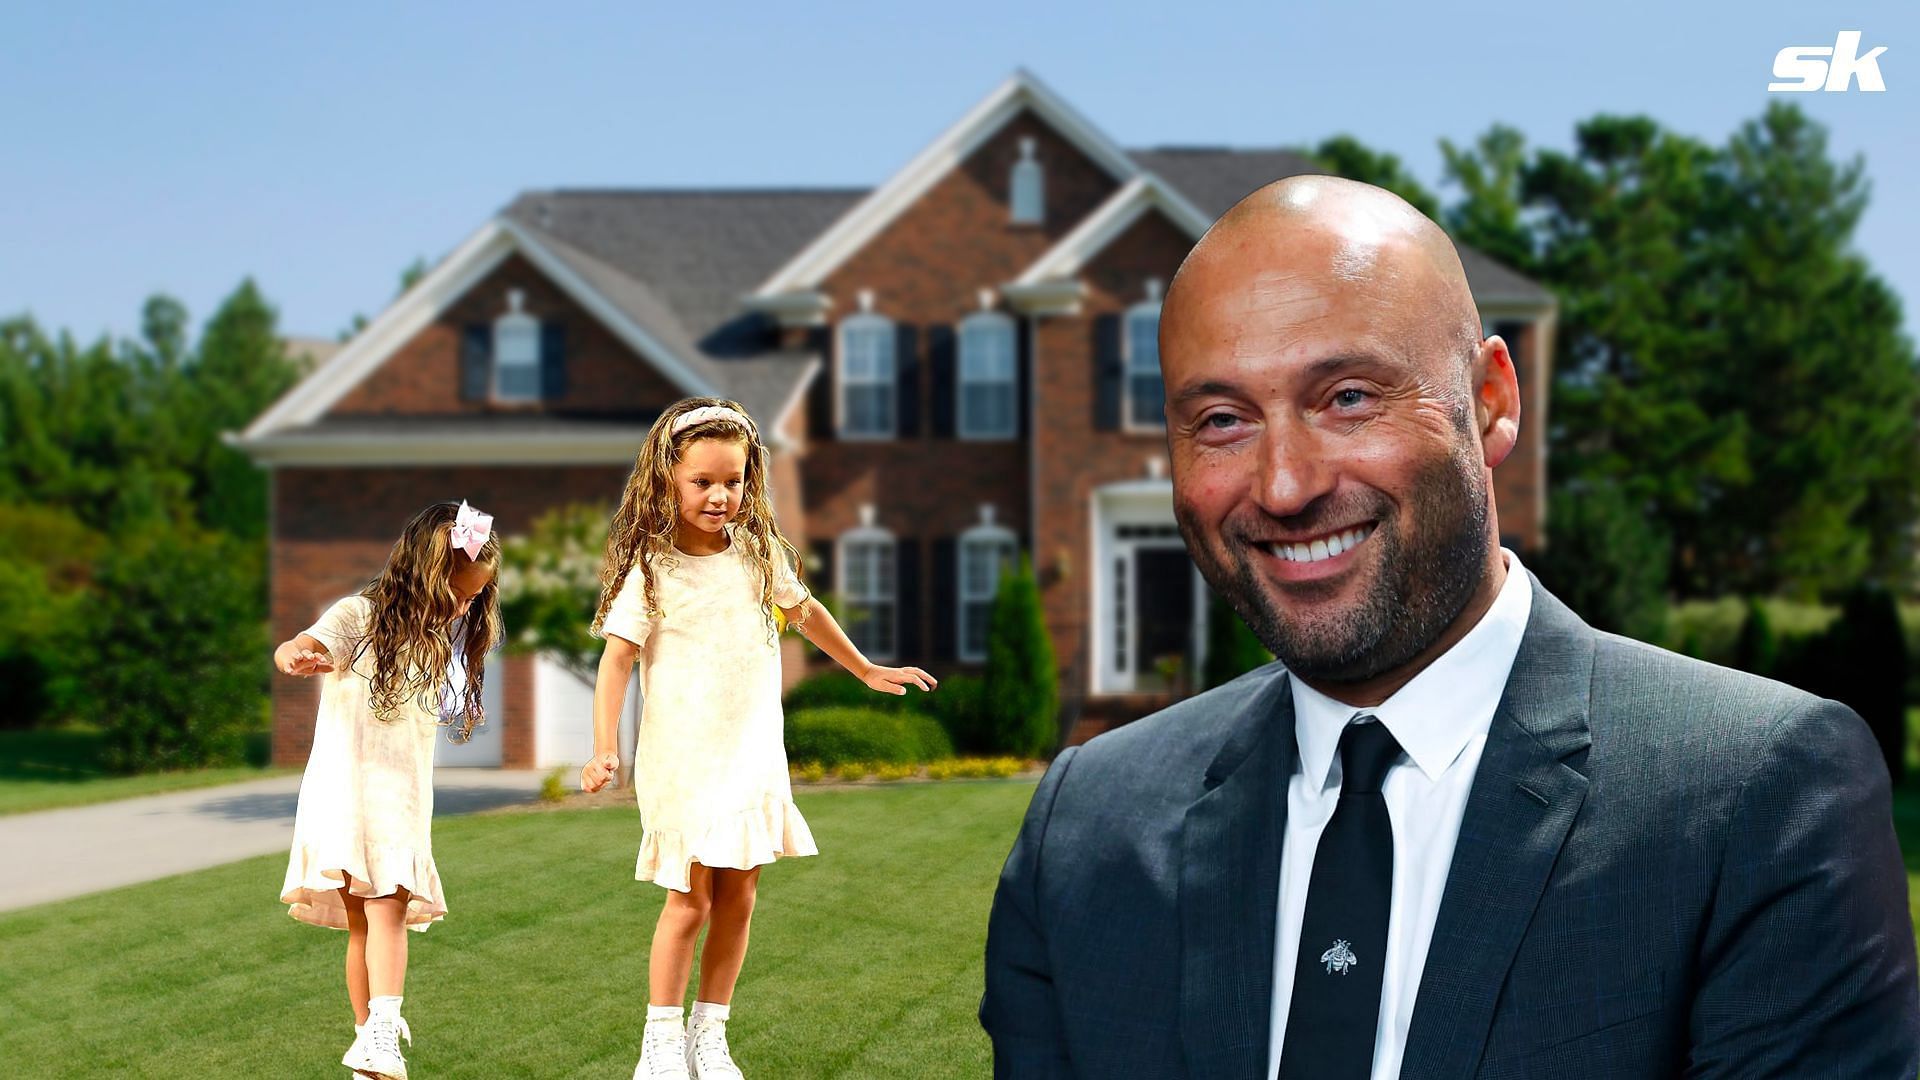 How is Derek Jeter adapting to his new life as a dad?